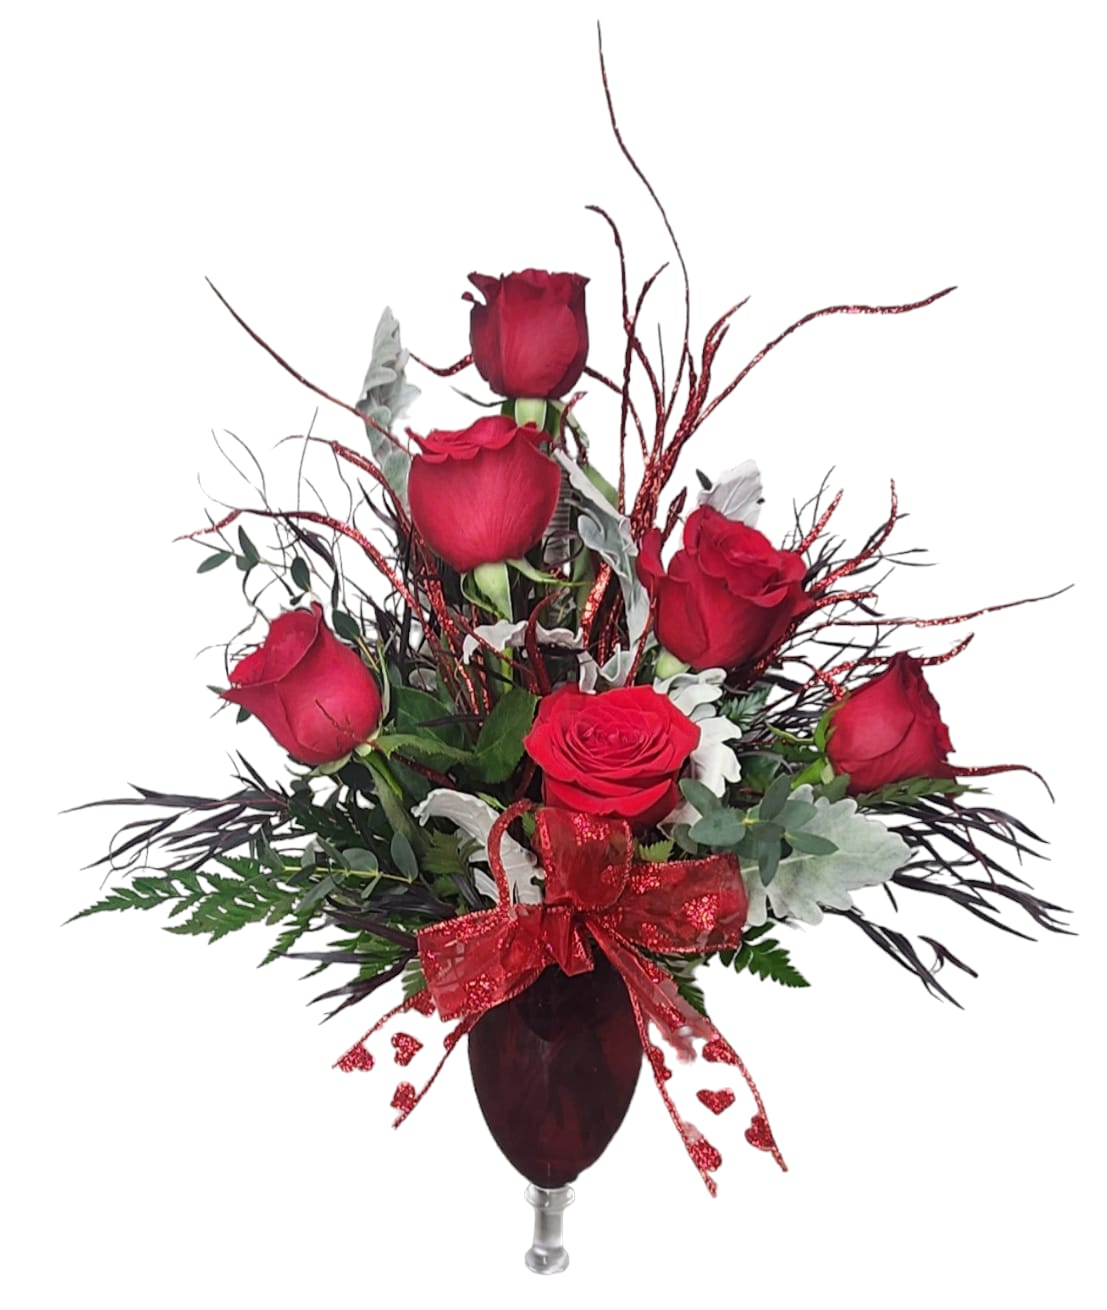 Sparkling Rose' Blossoms - Sip in the love the Sparkling Rose' Blossoms design gives. This exquisite design features sparkling red roses in a wine glass topped with a seasonal Valentine's Day bow. This is sure to please the senses.